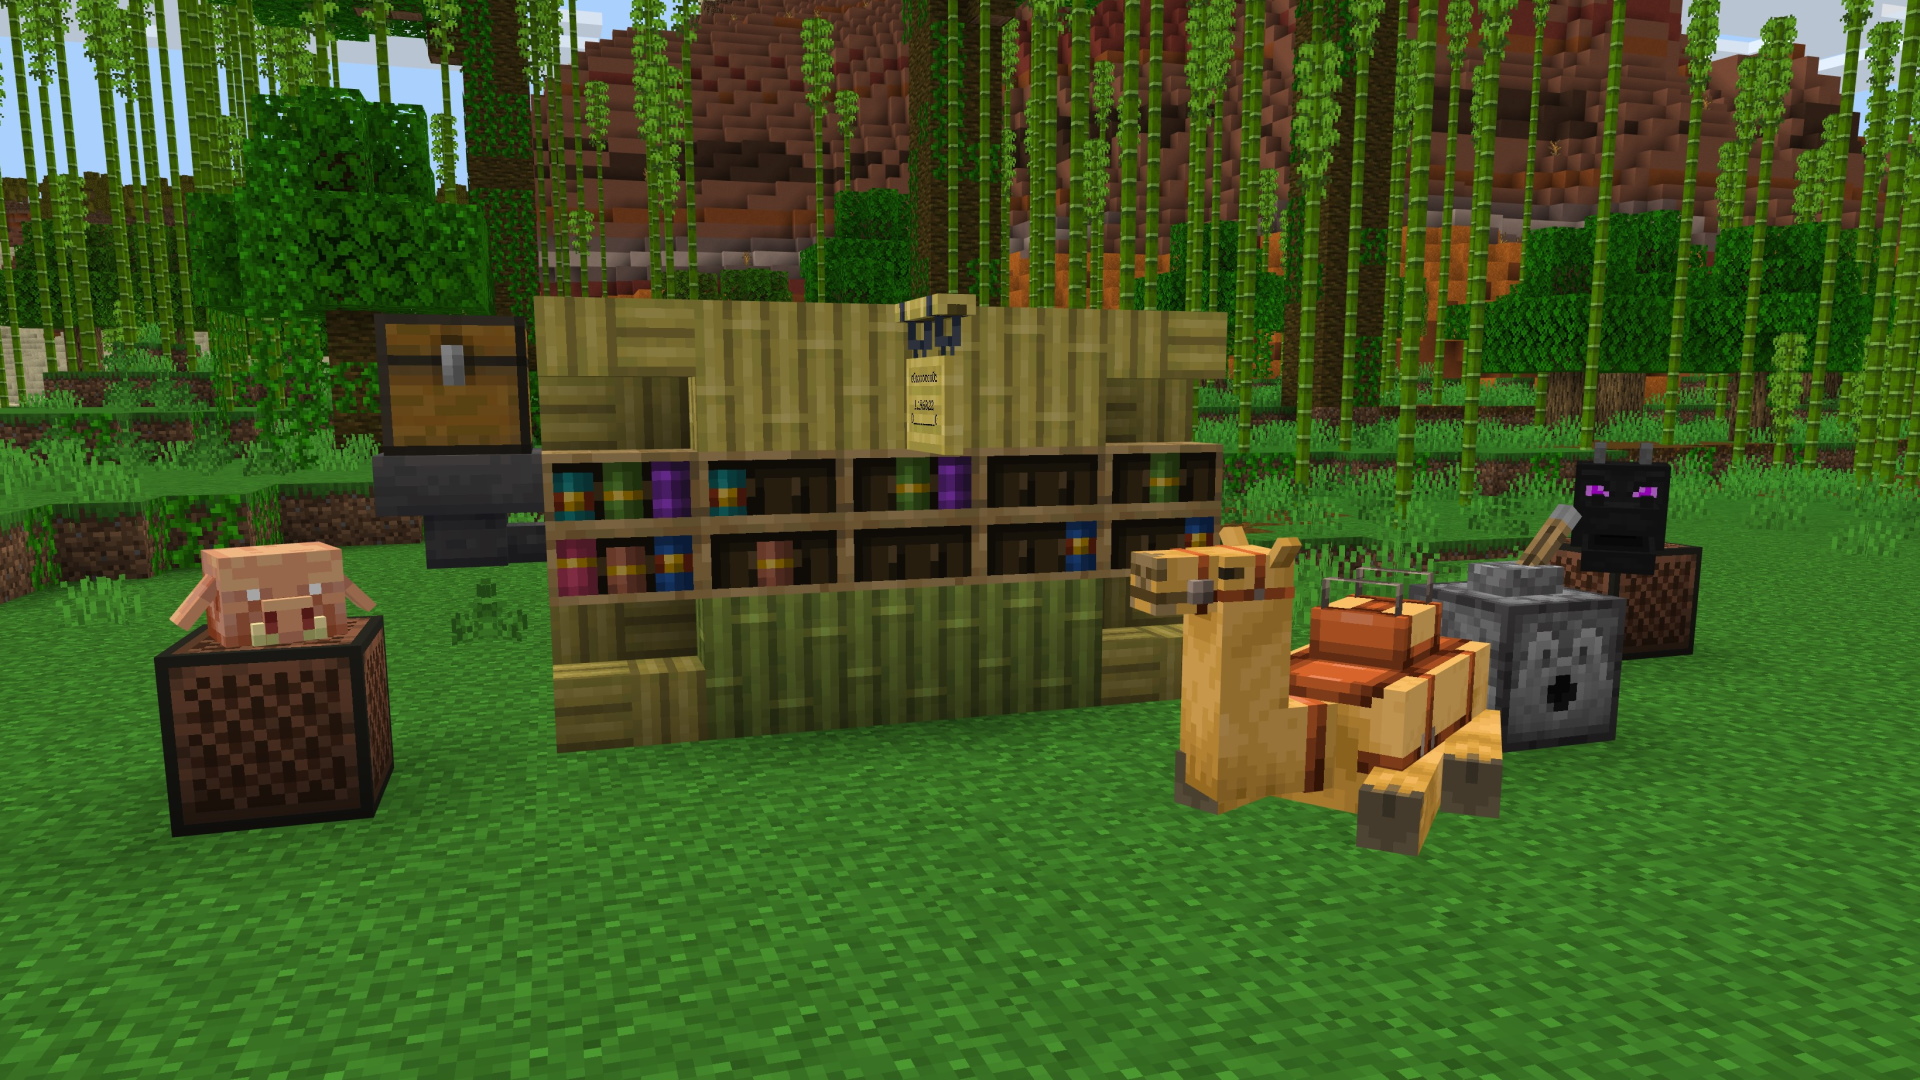 A Minecraft screenshot featuring chiseled bookshelves, a saddled camel, and mob heads on note blocks.